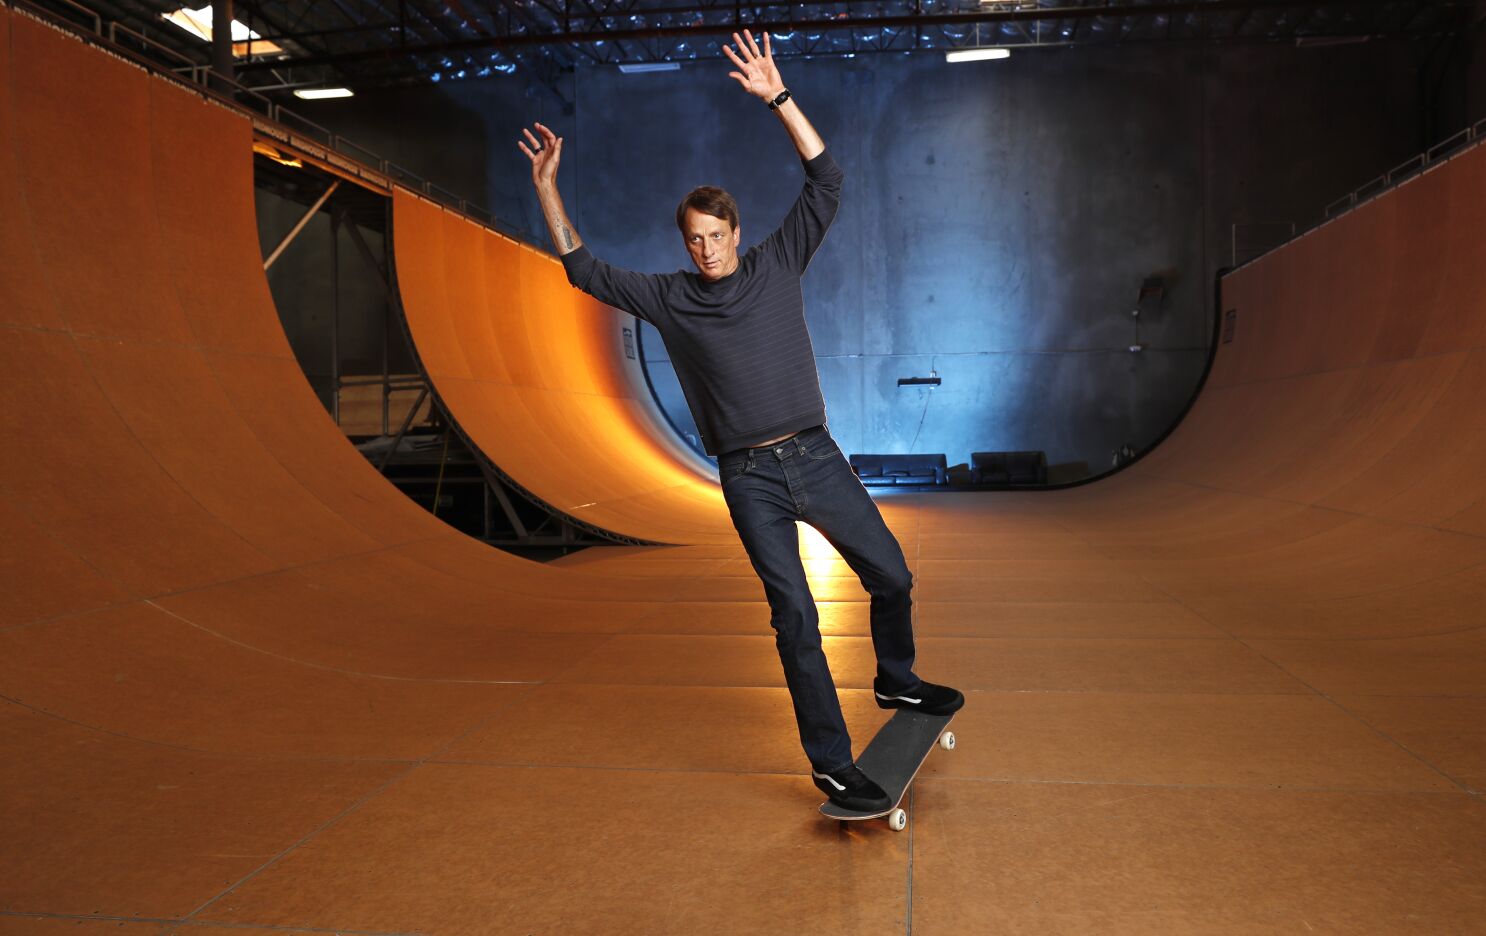 Tony Hawk 90s: Skateboarding Legend and Cultural Icon